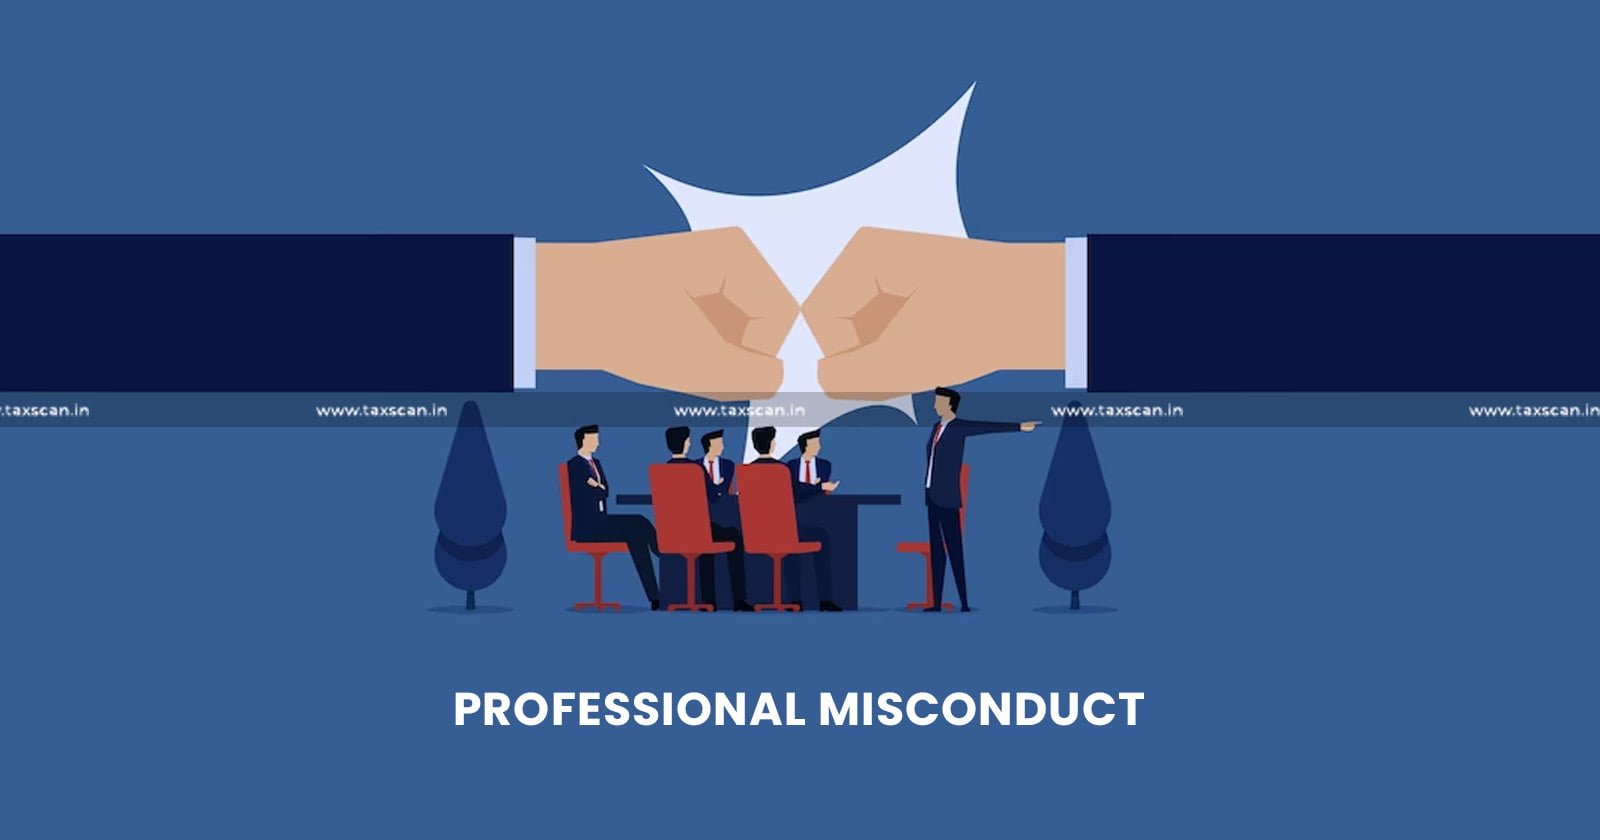 ICAI Reprimands CA for Professional Misconduct - ICAI - CA - Professional Misconduct - Accepting Appointment as Auditor - Appointment - Auditor - Requirements under Companies Act - taxscan